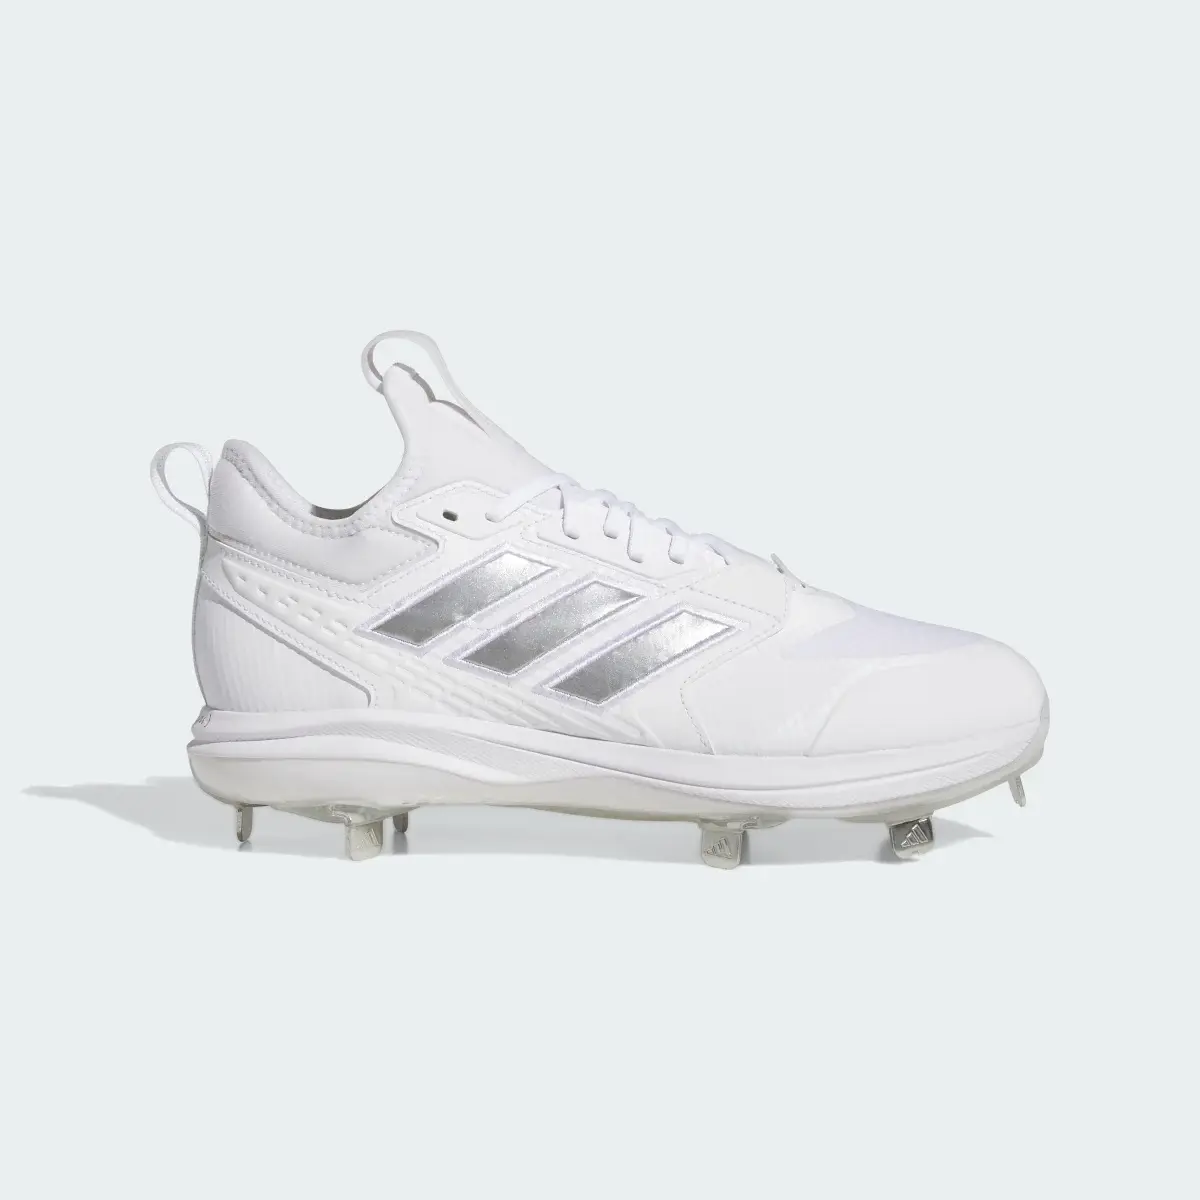 Adidas Icon 8 BOOST Cleats. 2